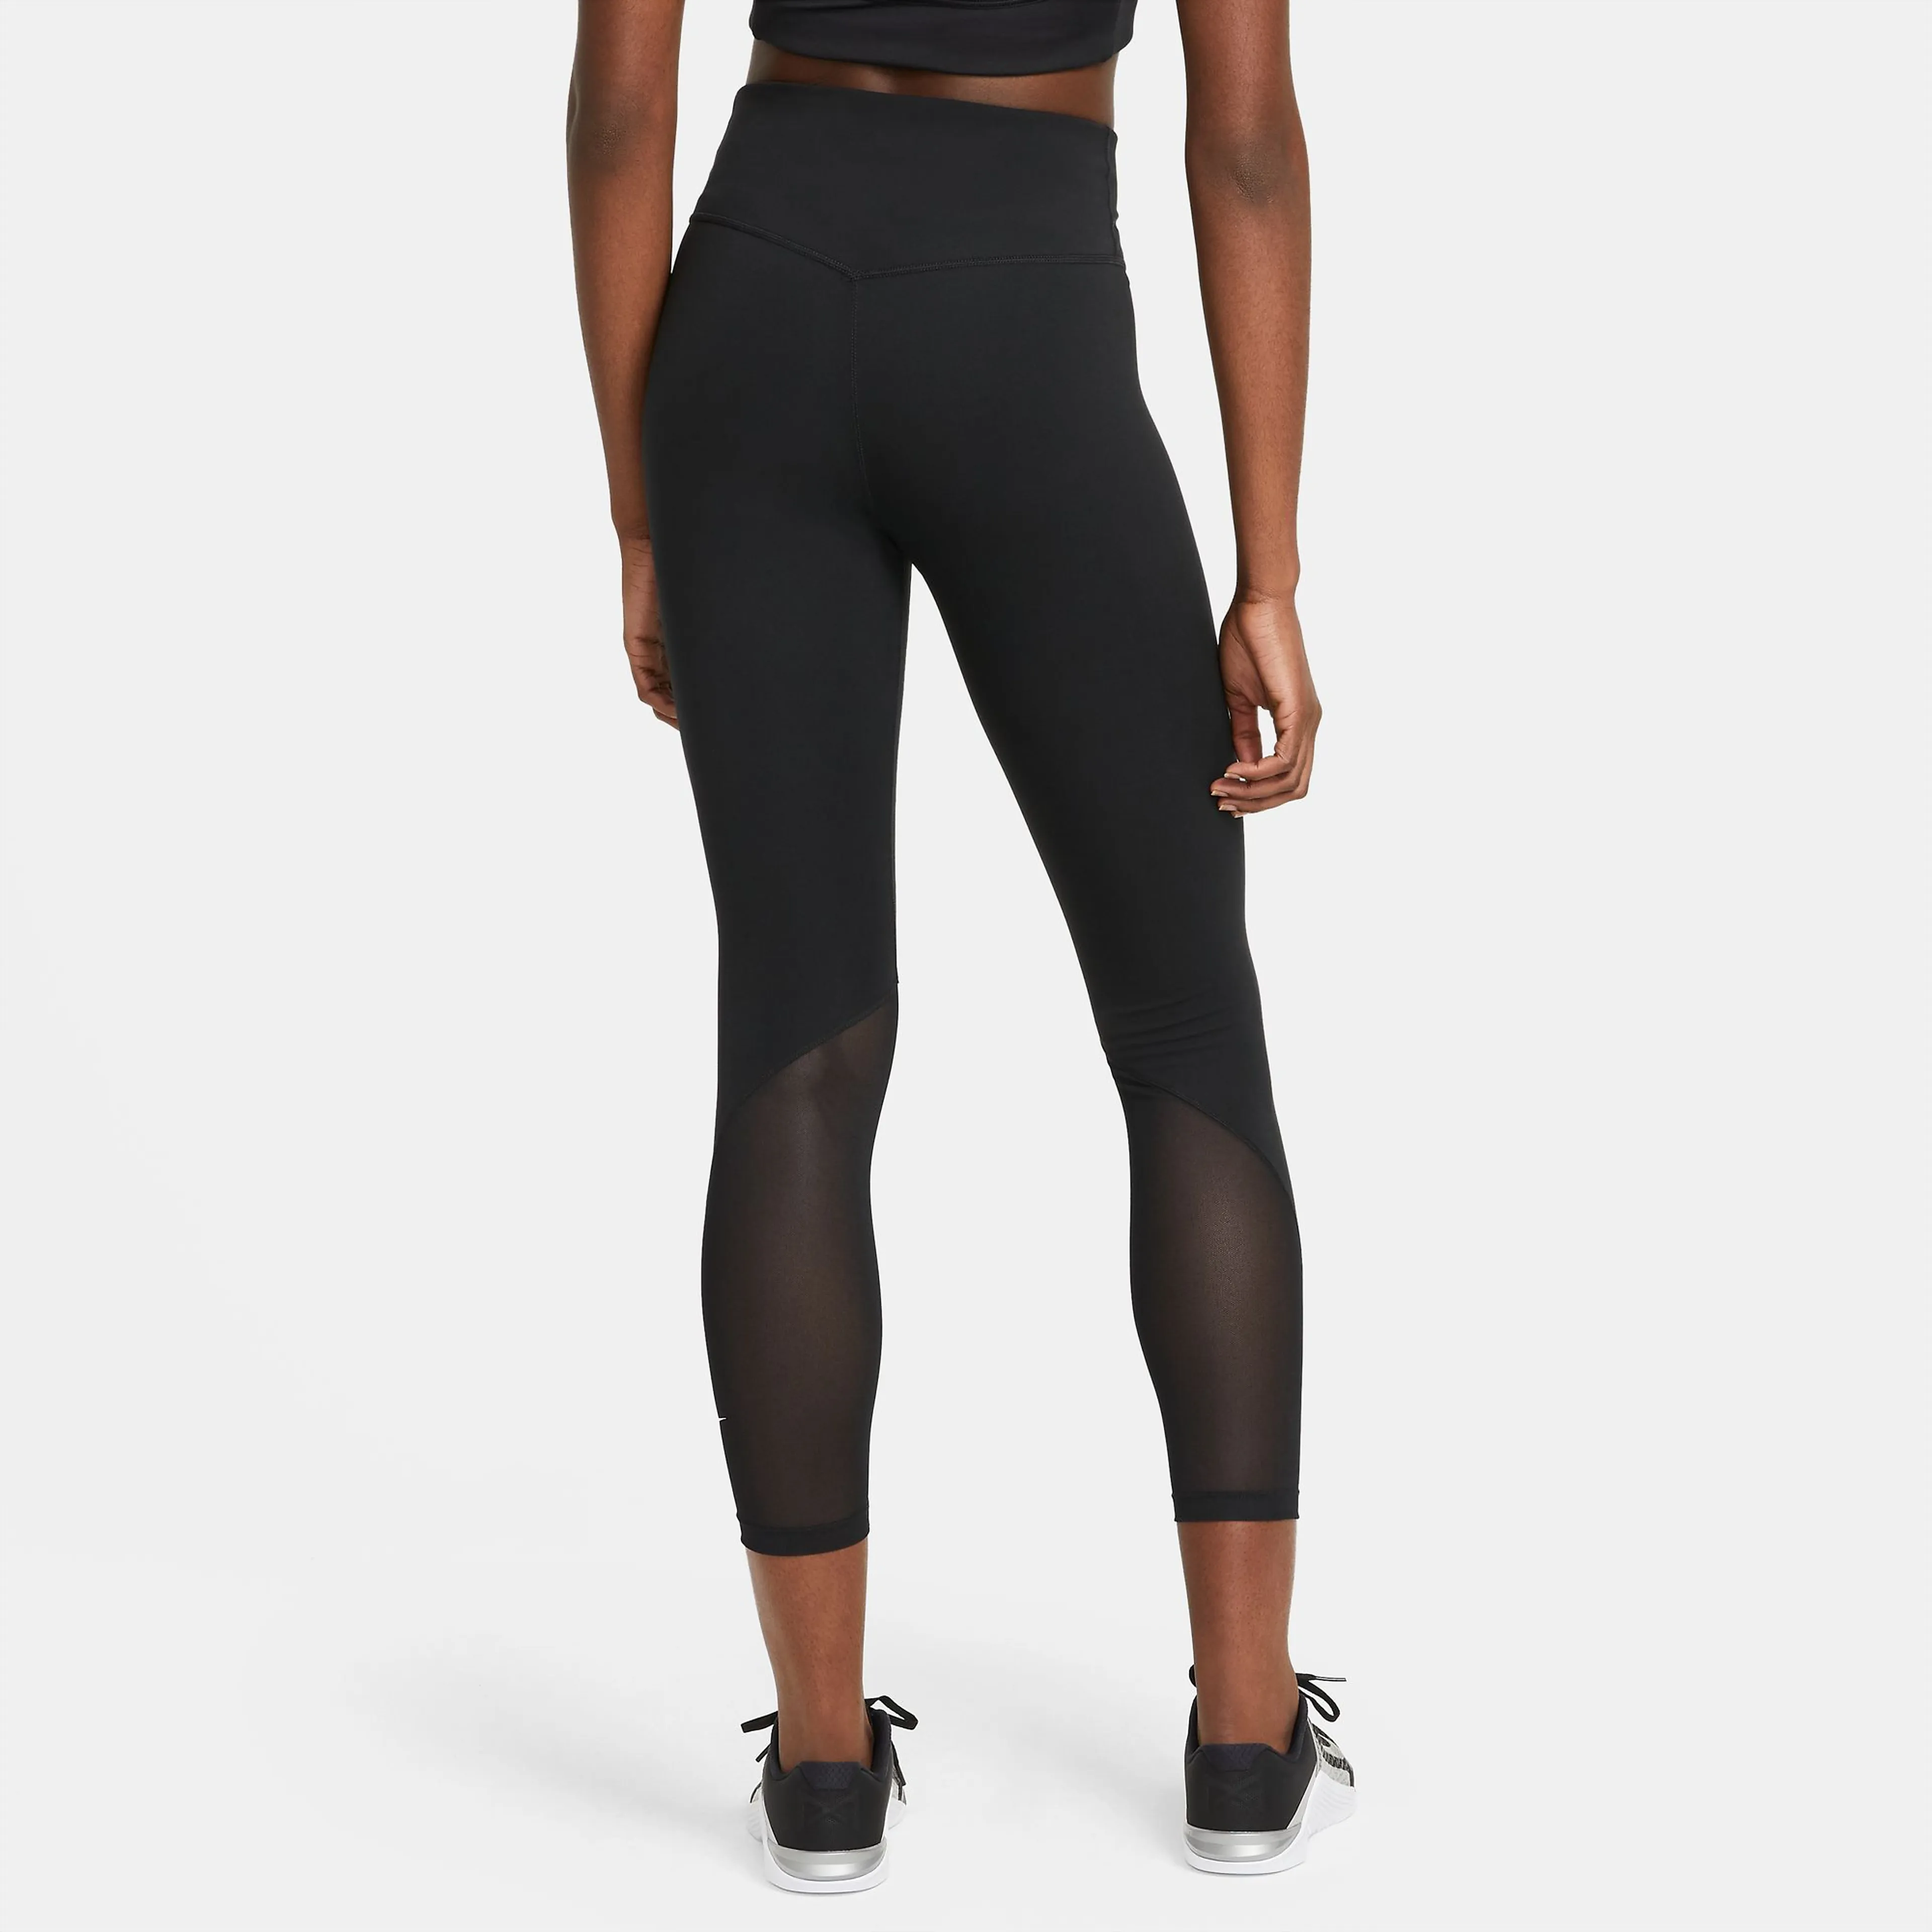 Nike One 7/8 Mid-Rise Tights